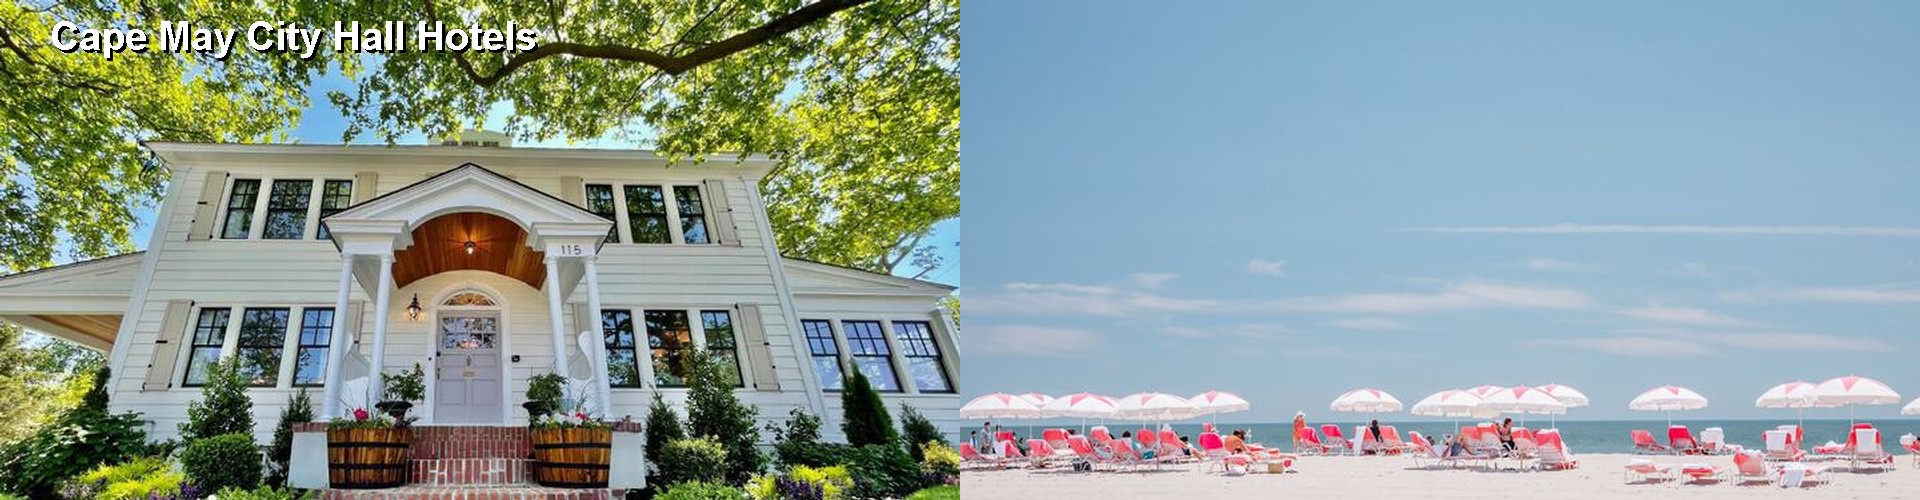 5 Best Hotels near Cape May City Hall